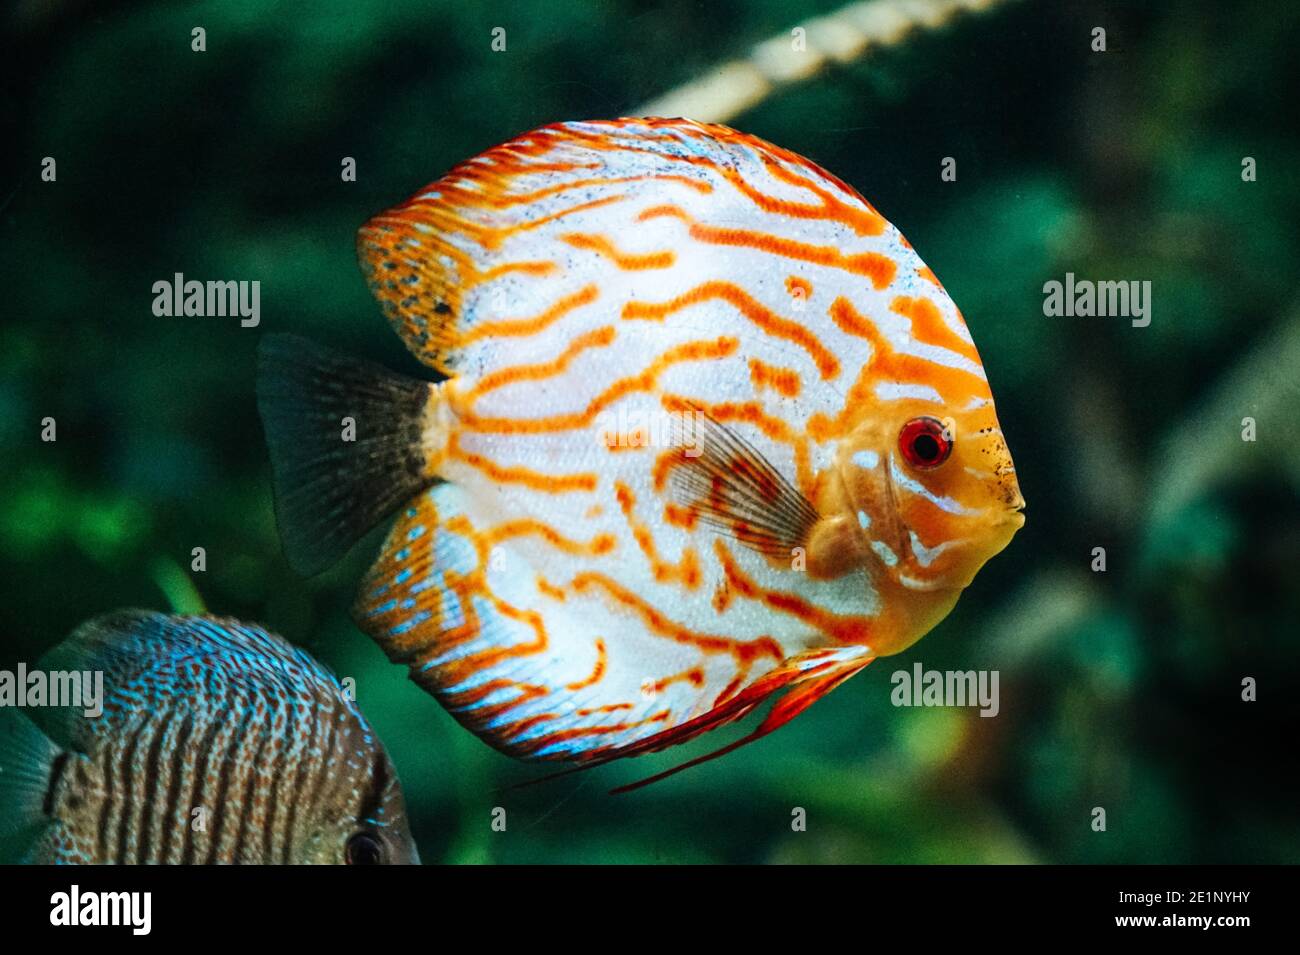 Orange and white discus fish - side view Stock Photo